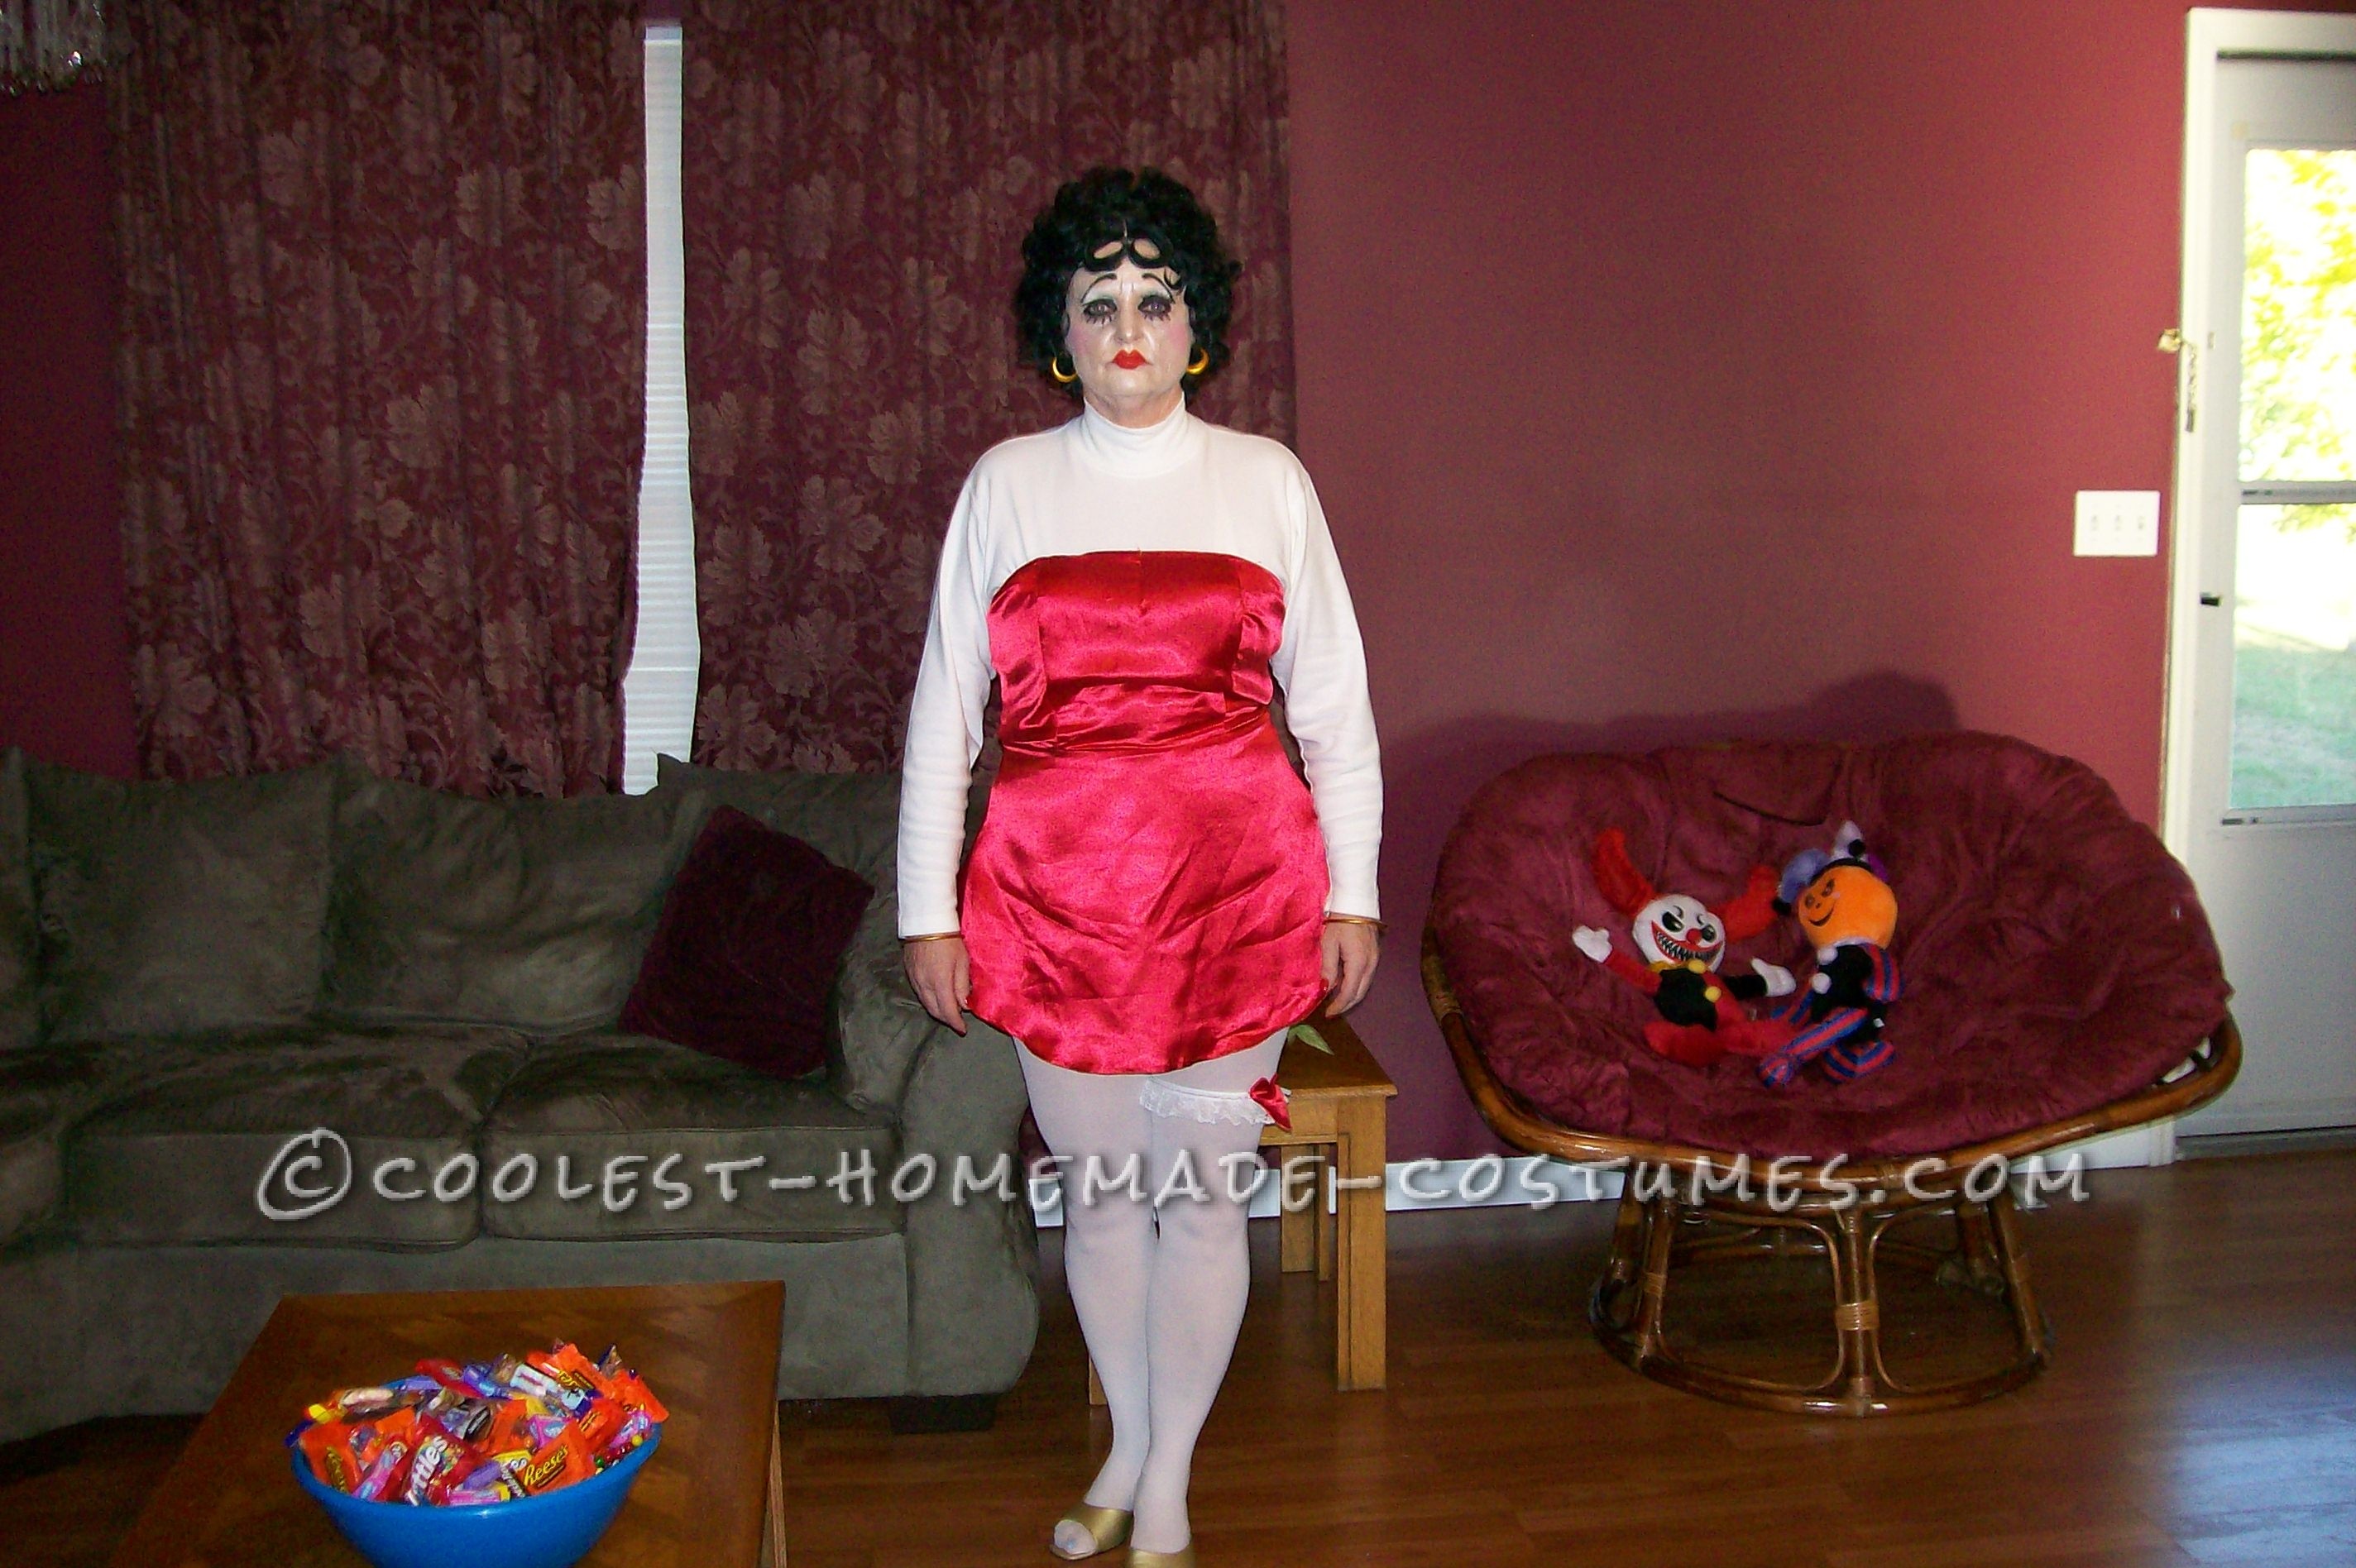 Cool Costume for Women: Betty Boop Comes to Life!